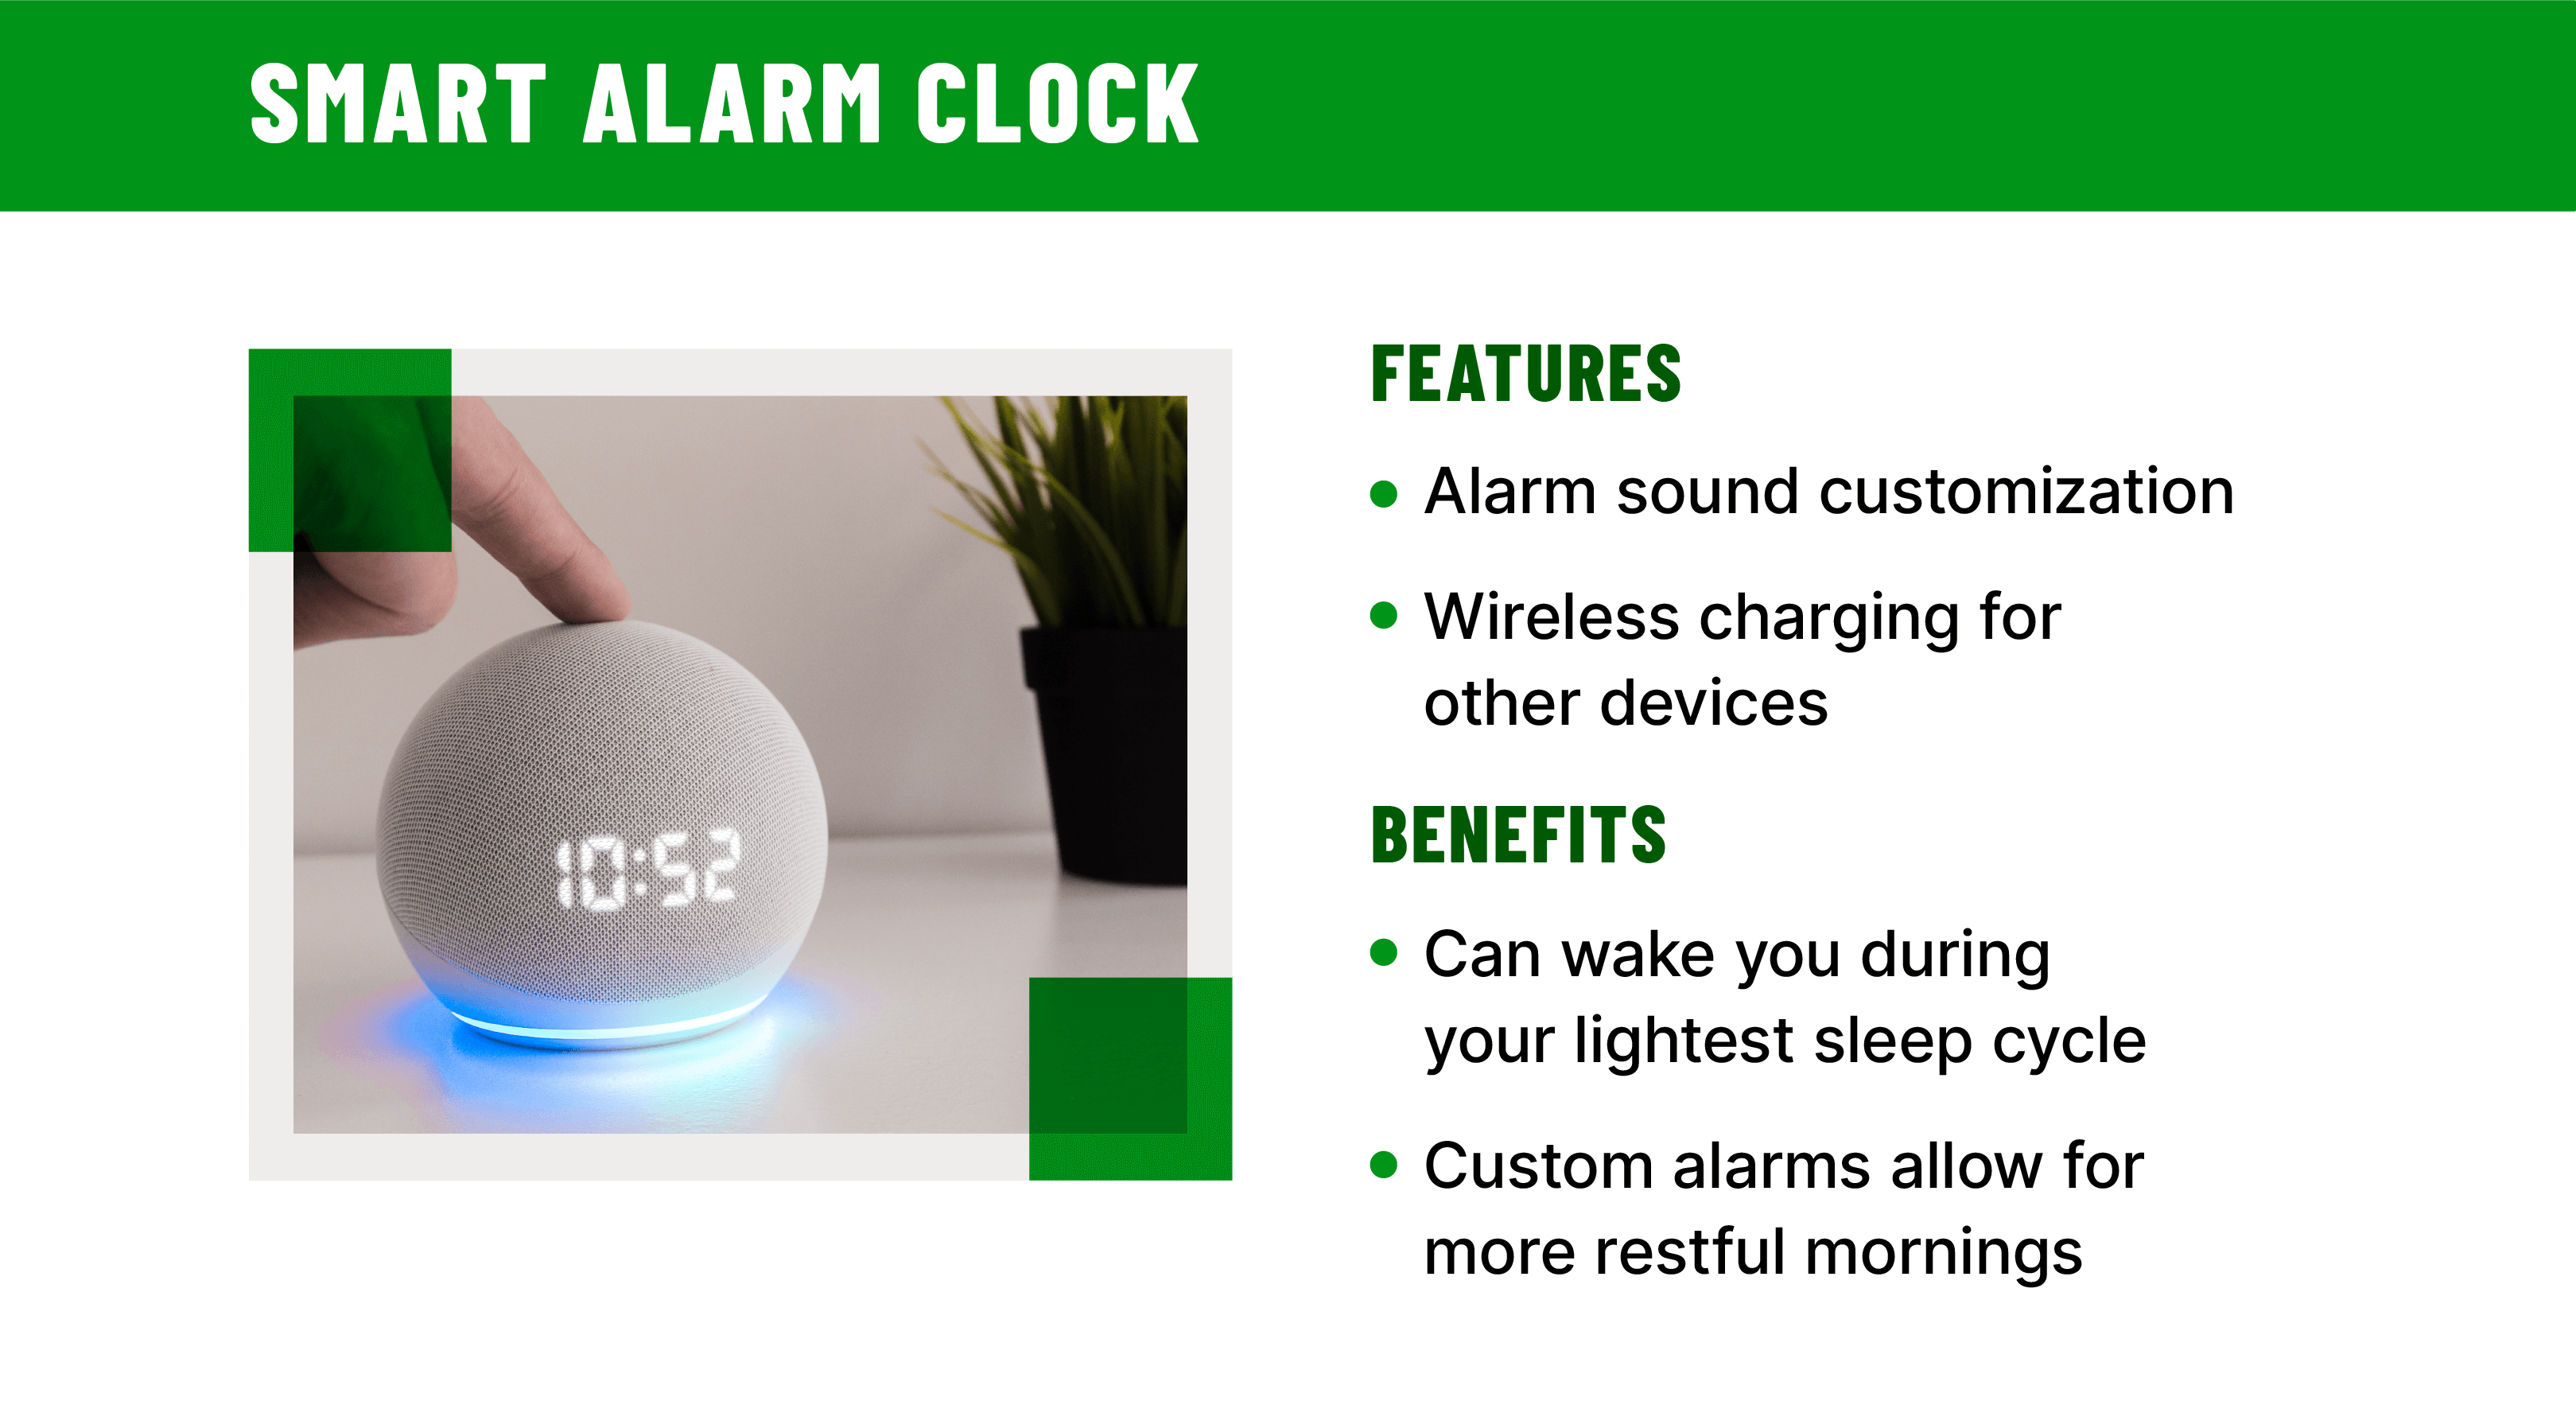 Image of a smart alarm clock with text describing the features and benefits